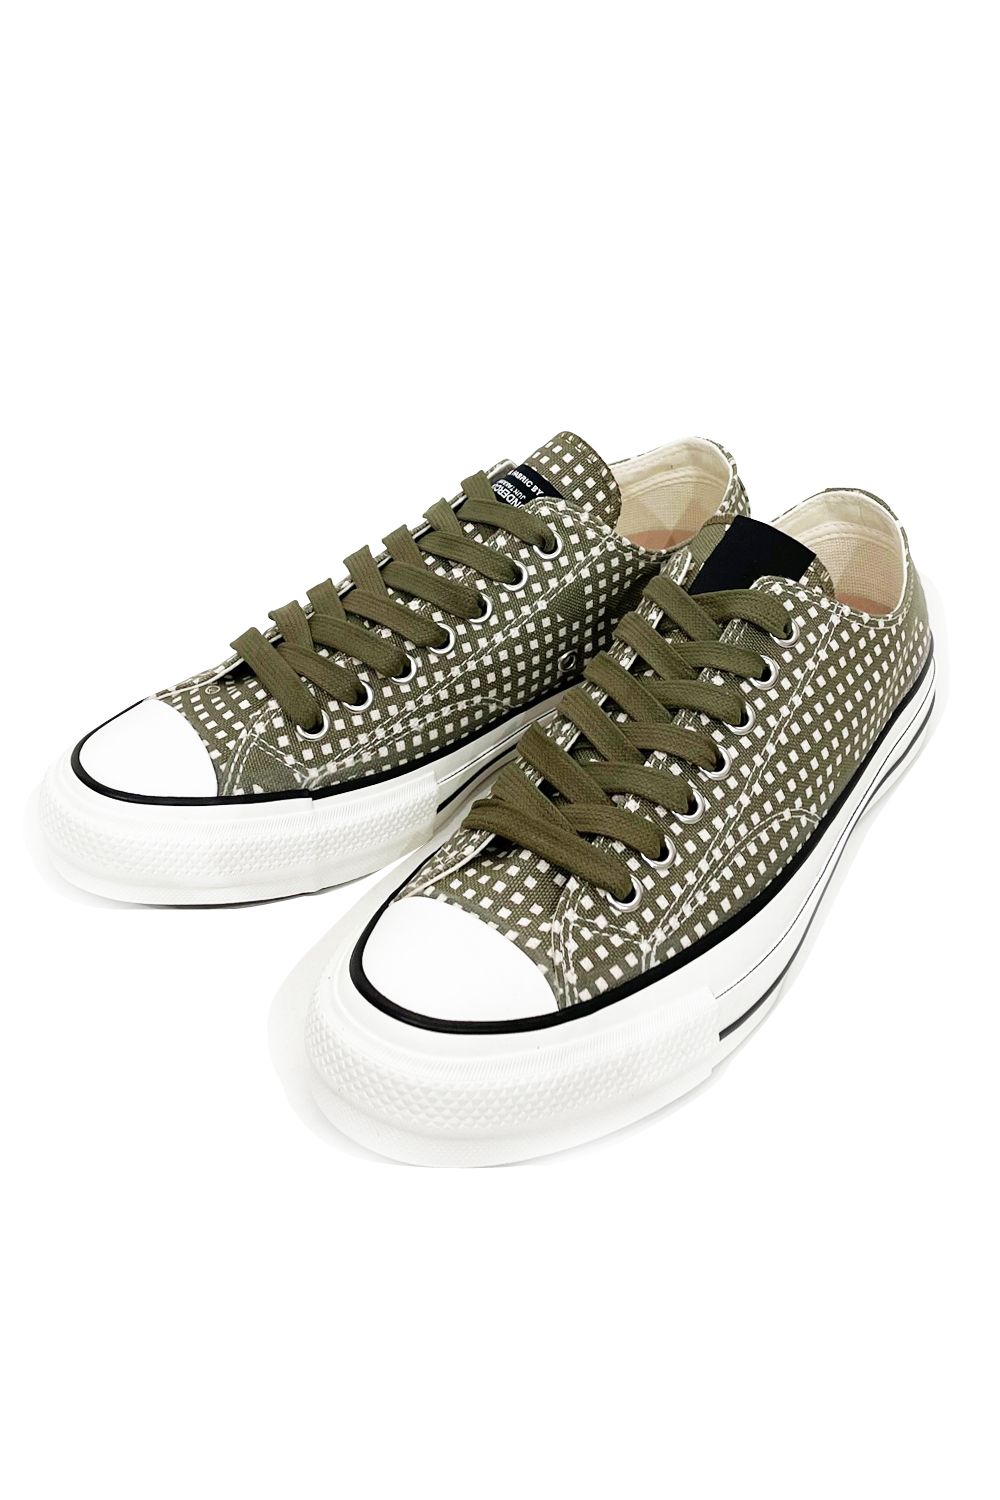 N.HOOLYWOOD - N.HOOLYWOOD REBEL FABRIC BY UNDERCOVER × CONVERSE